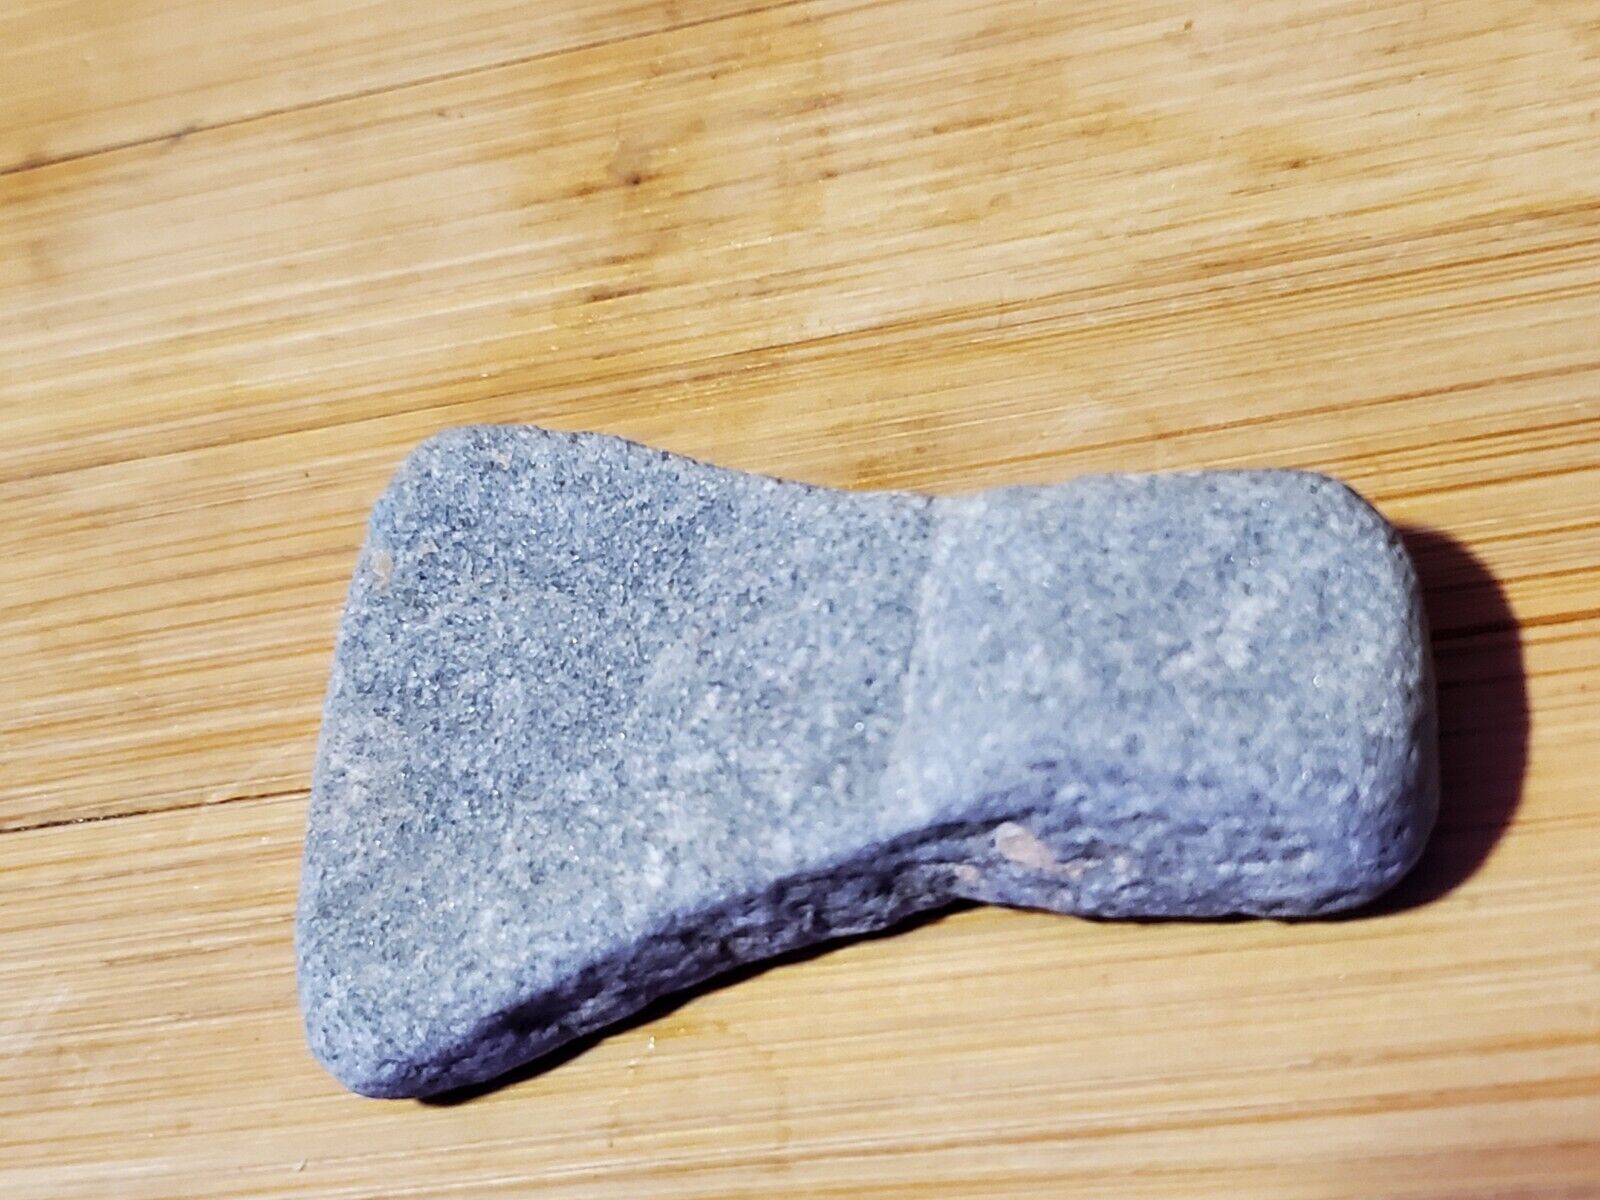 Authentic Paleo Stone Axe Arrowhead Pre owned.